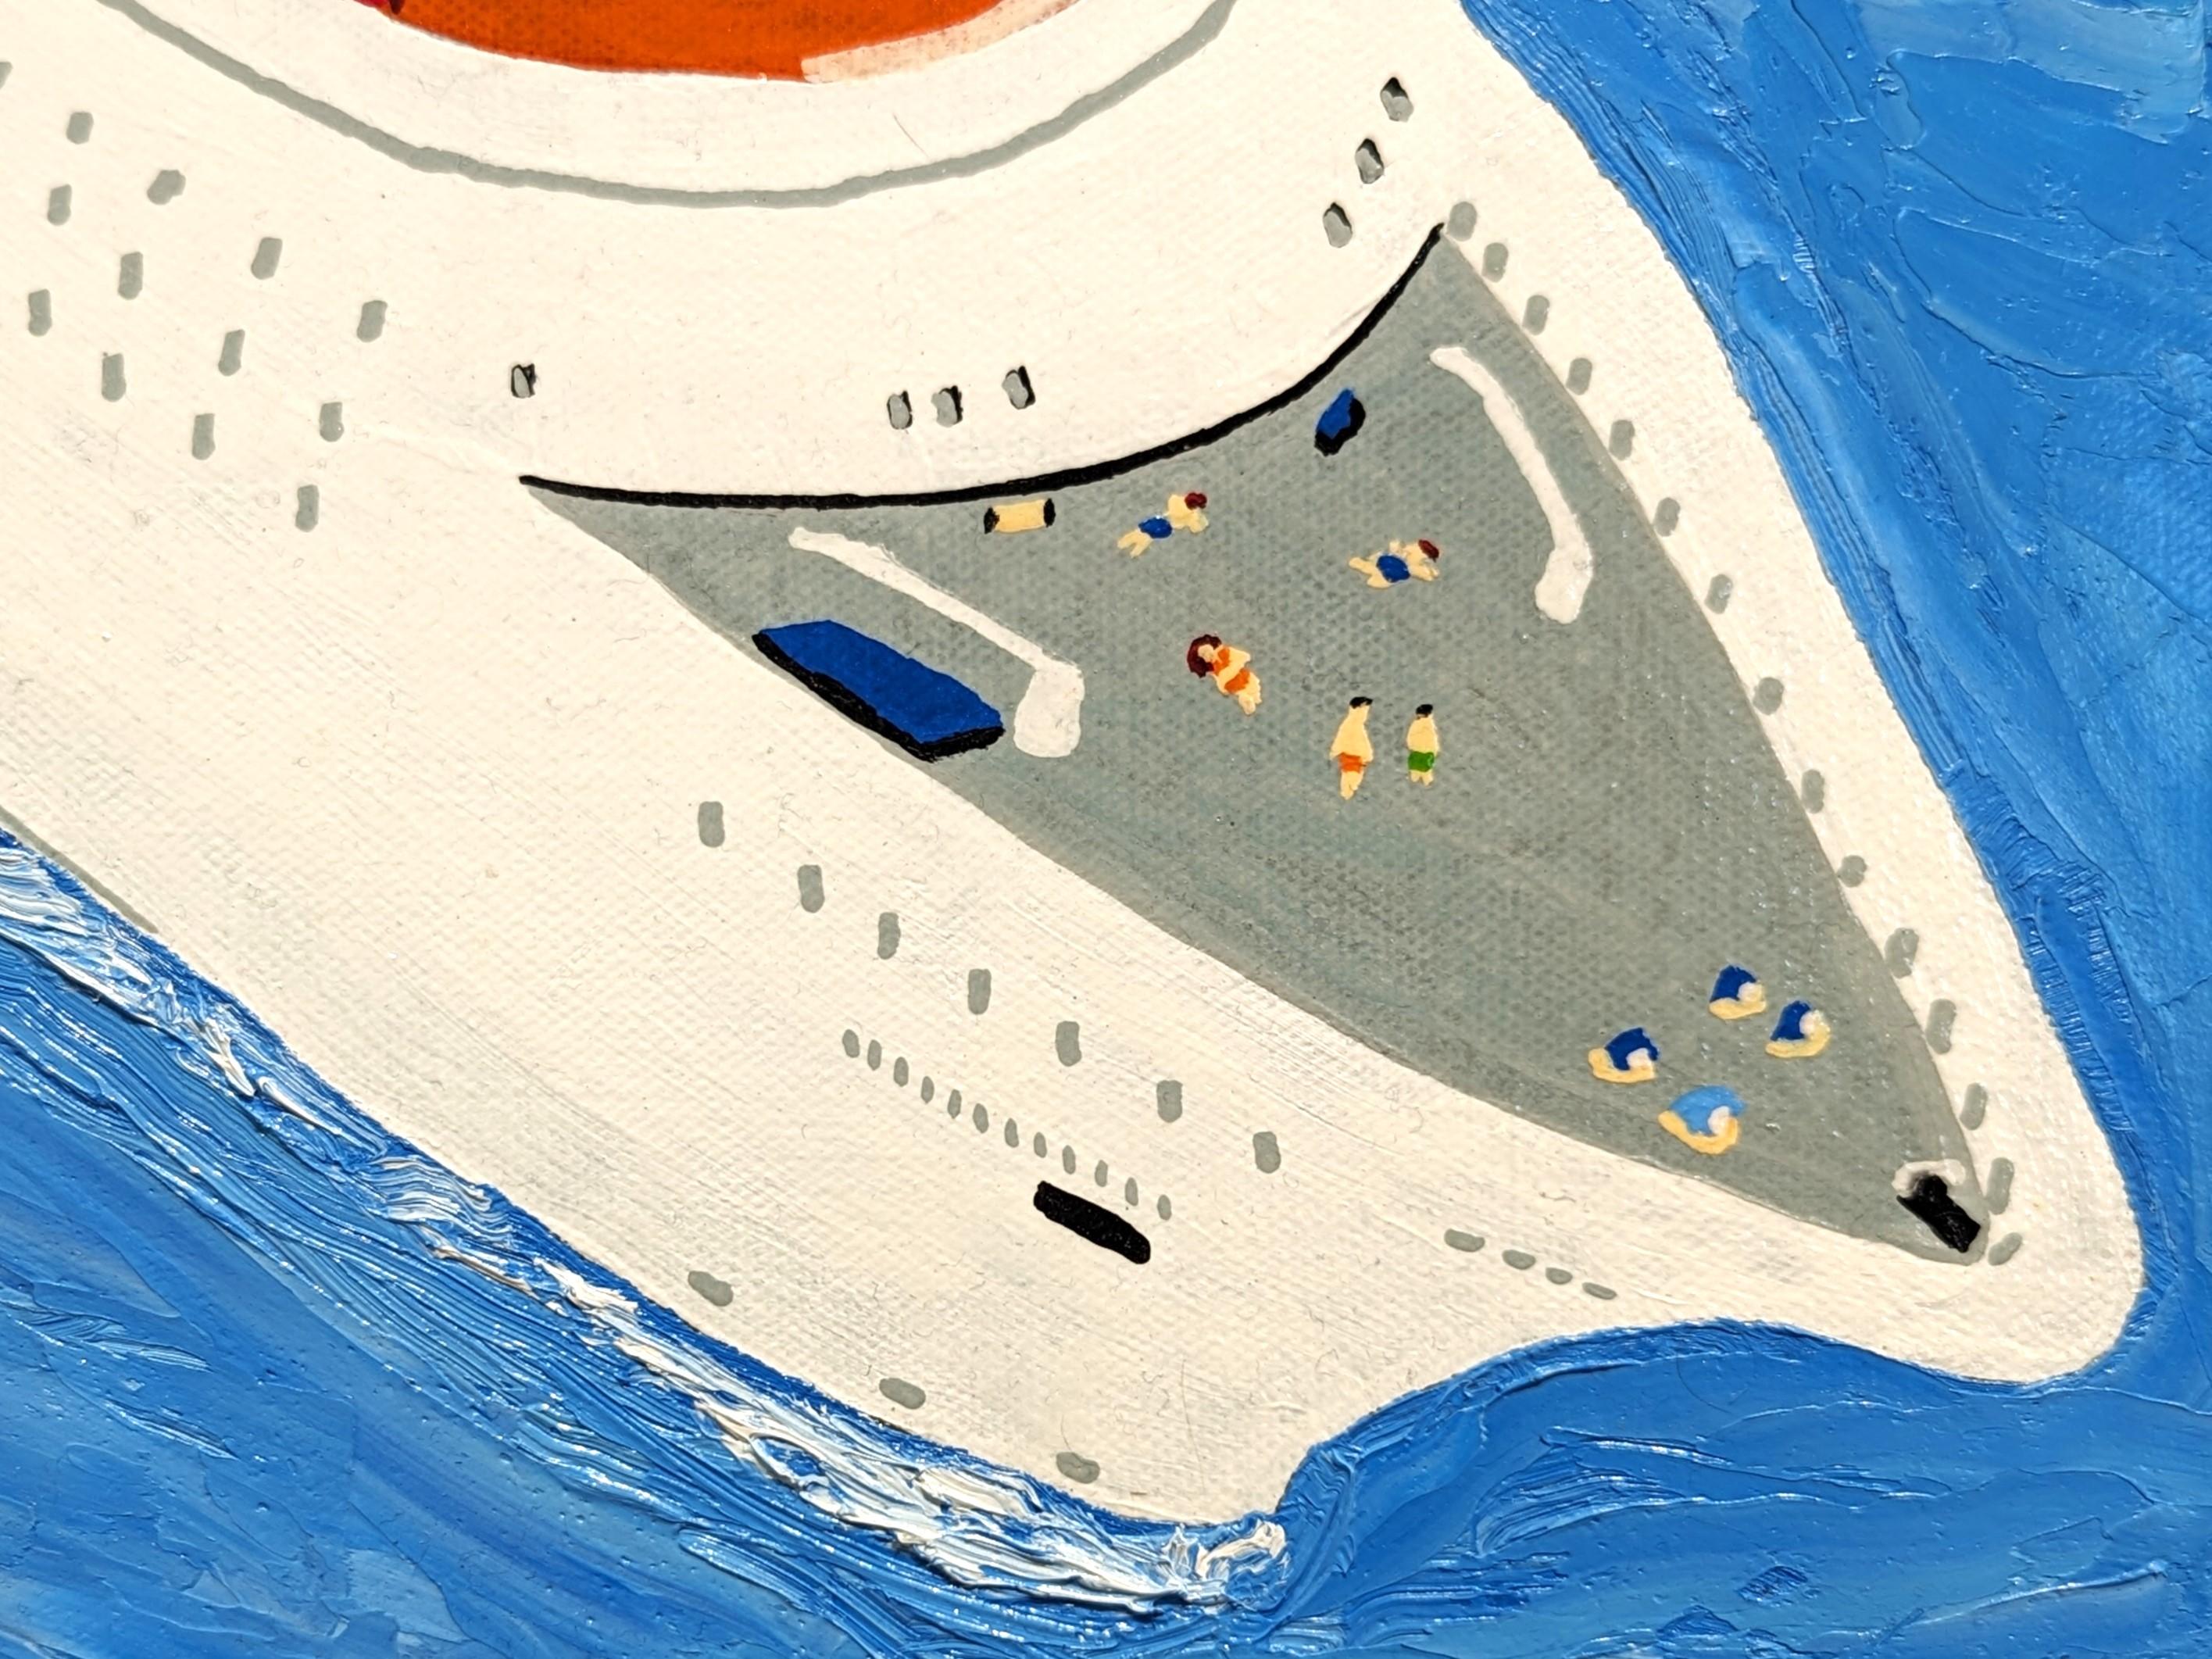 “I guess that's the game” Colorful Contemporary Humorous Ship Landscape Painting For Sale 8